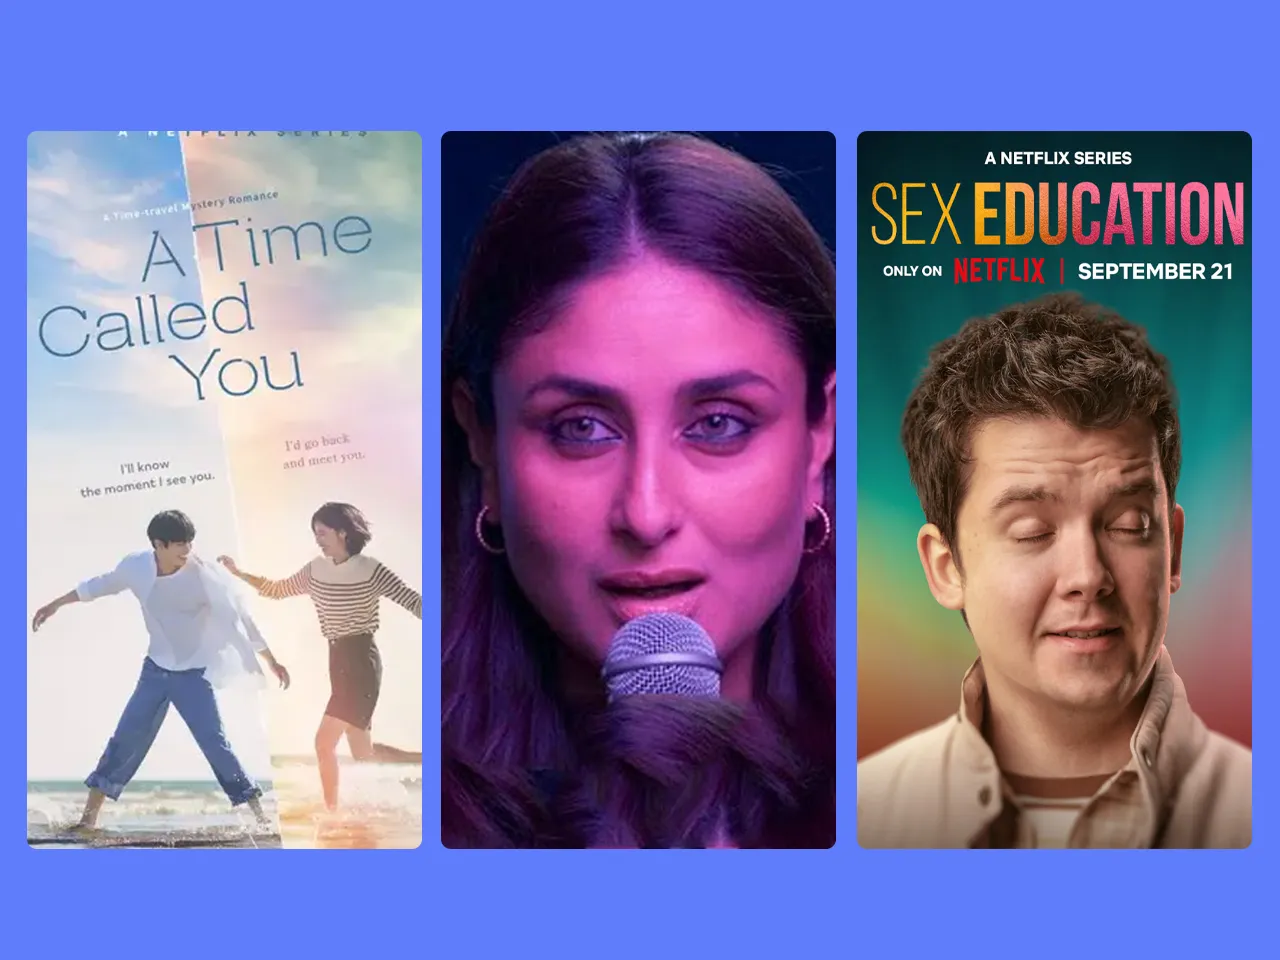 Netflix releases in September have a captivating blend of teen drama, romance and thriller and we’re excited for it all!